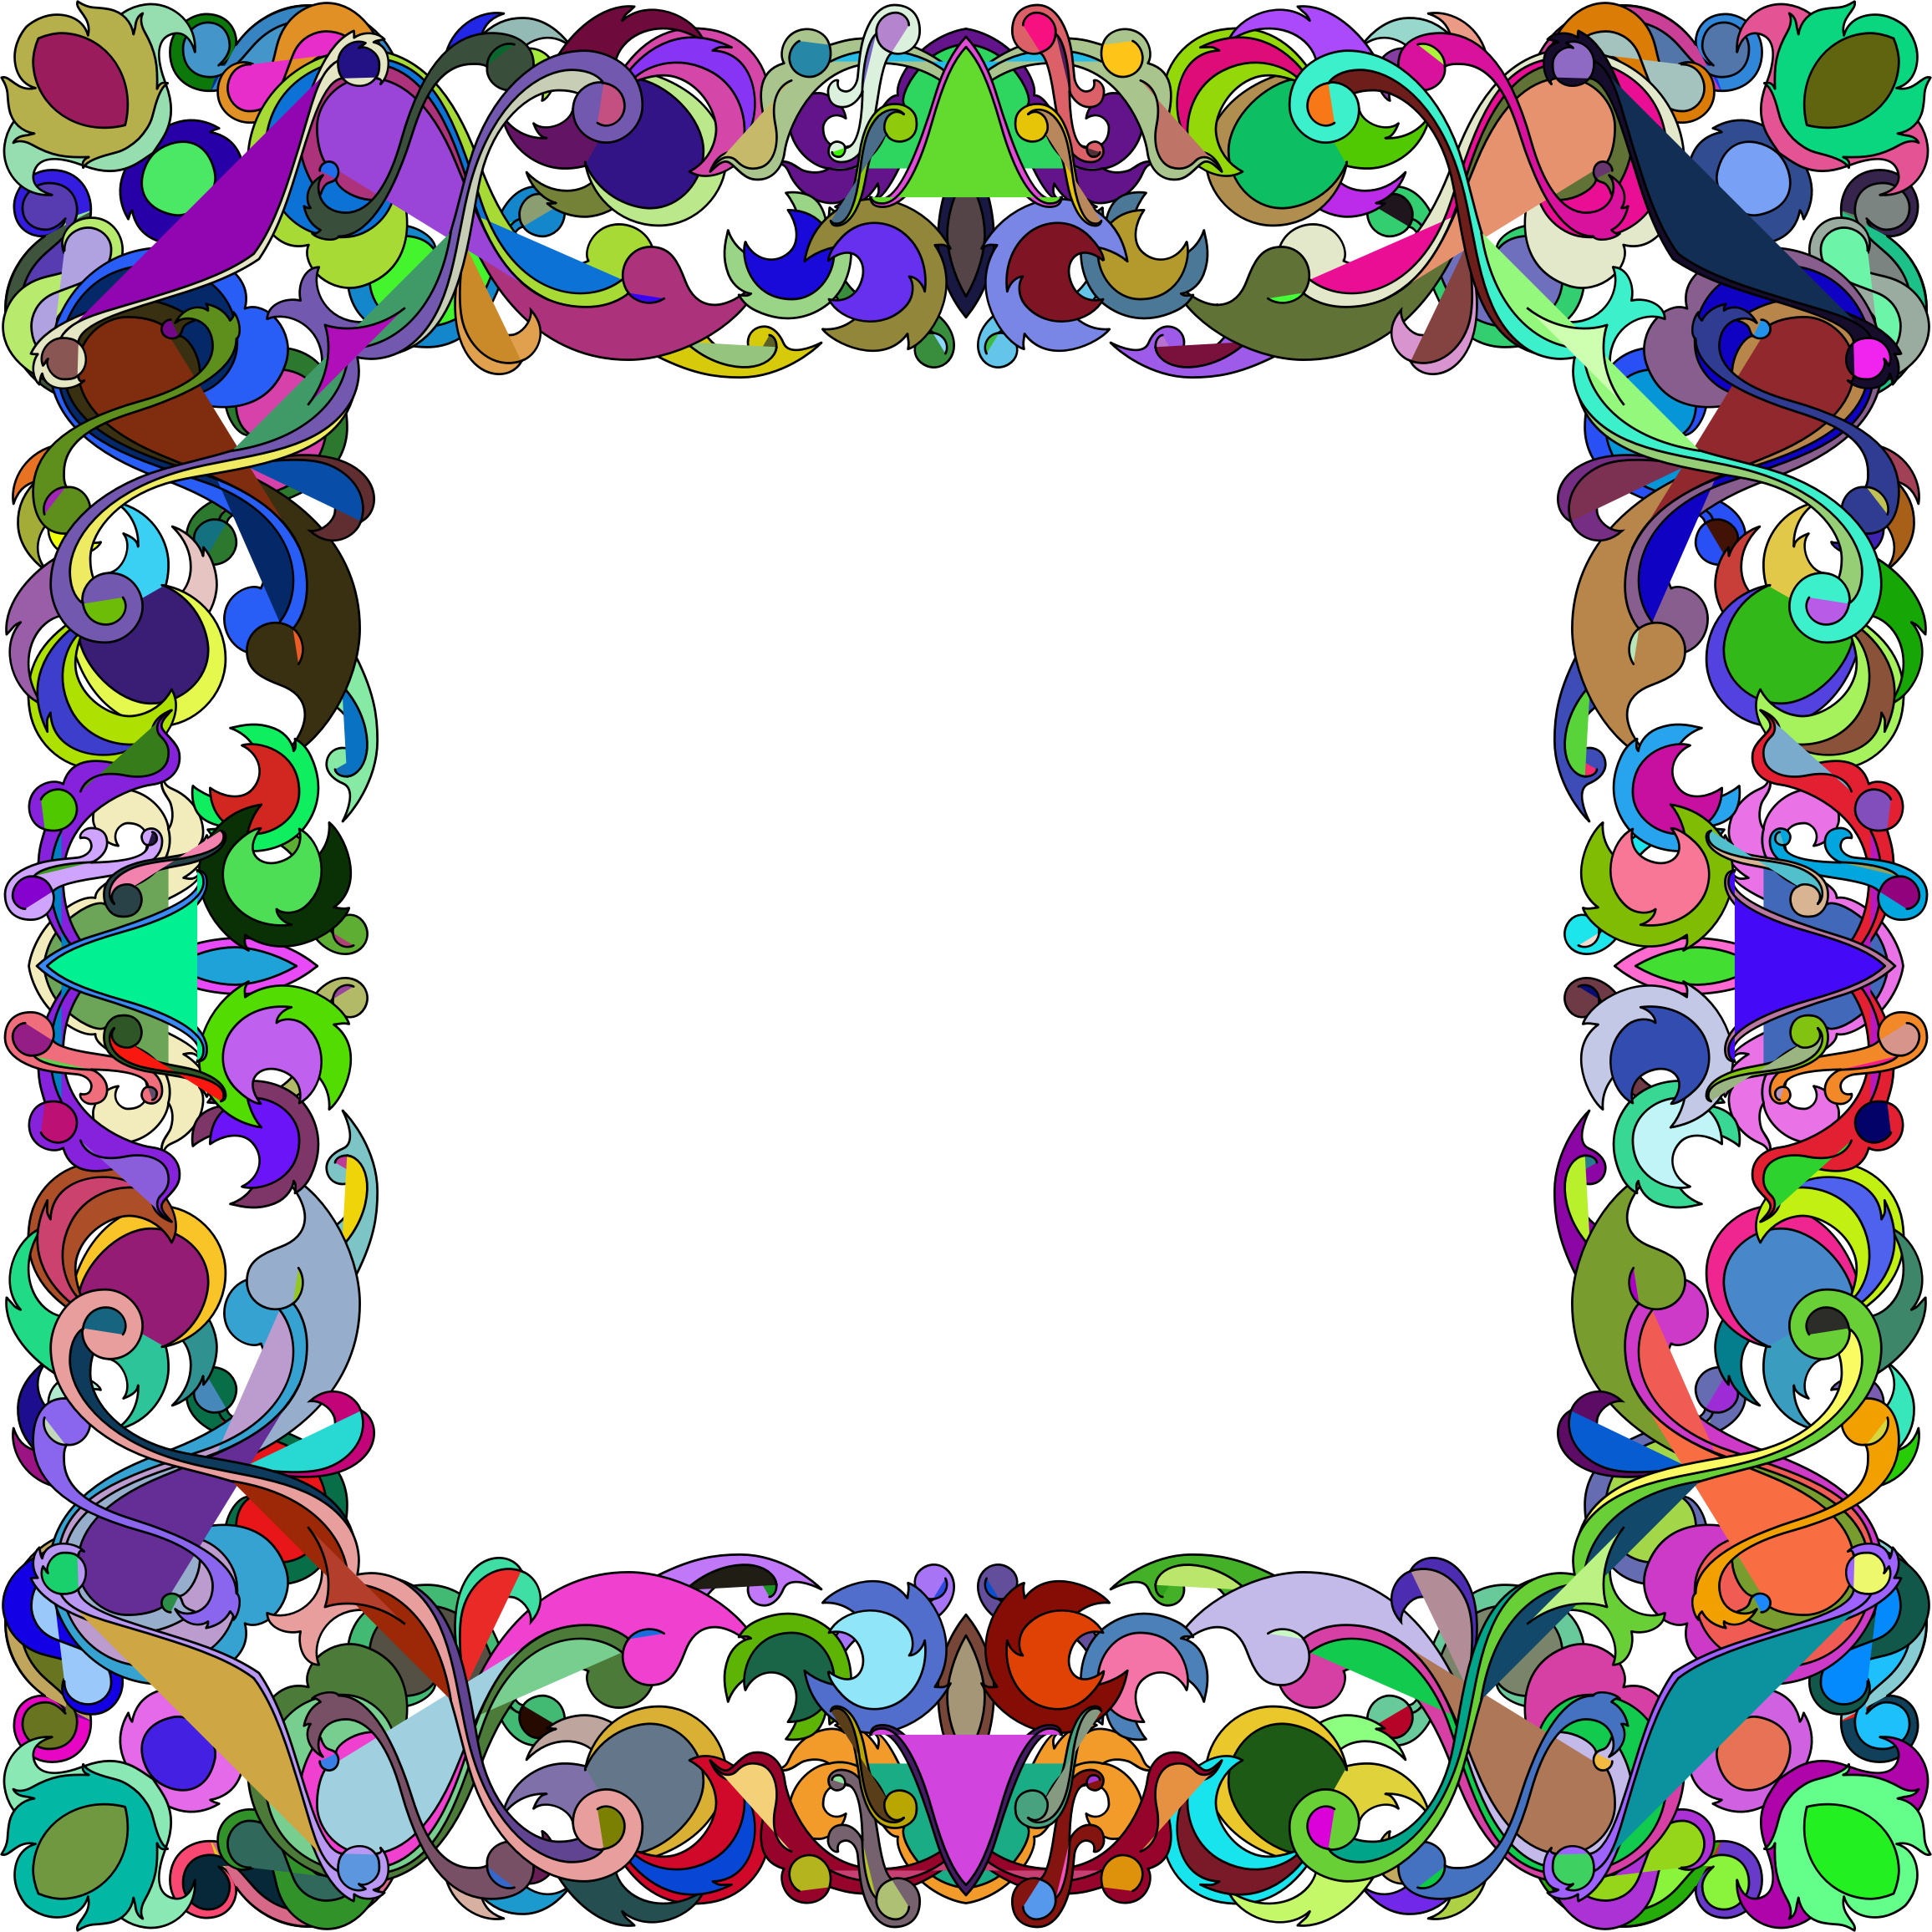 Download PNG image - Abstract Frame Transparent PNG 